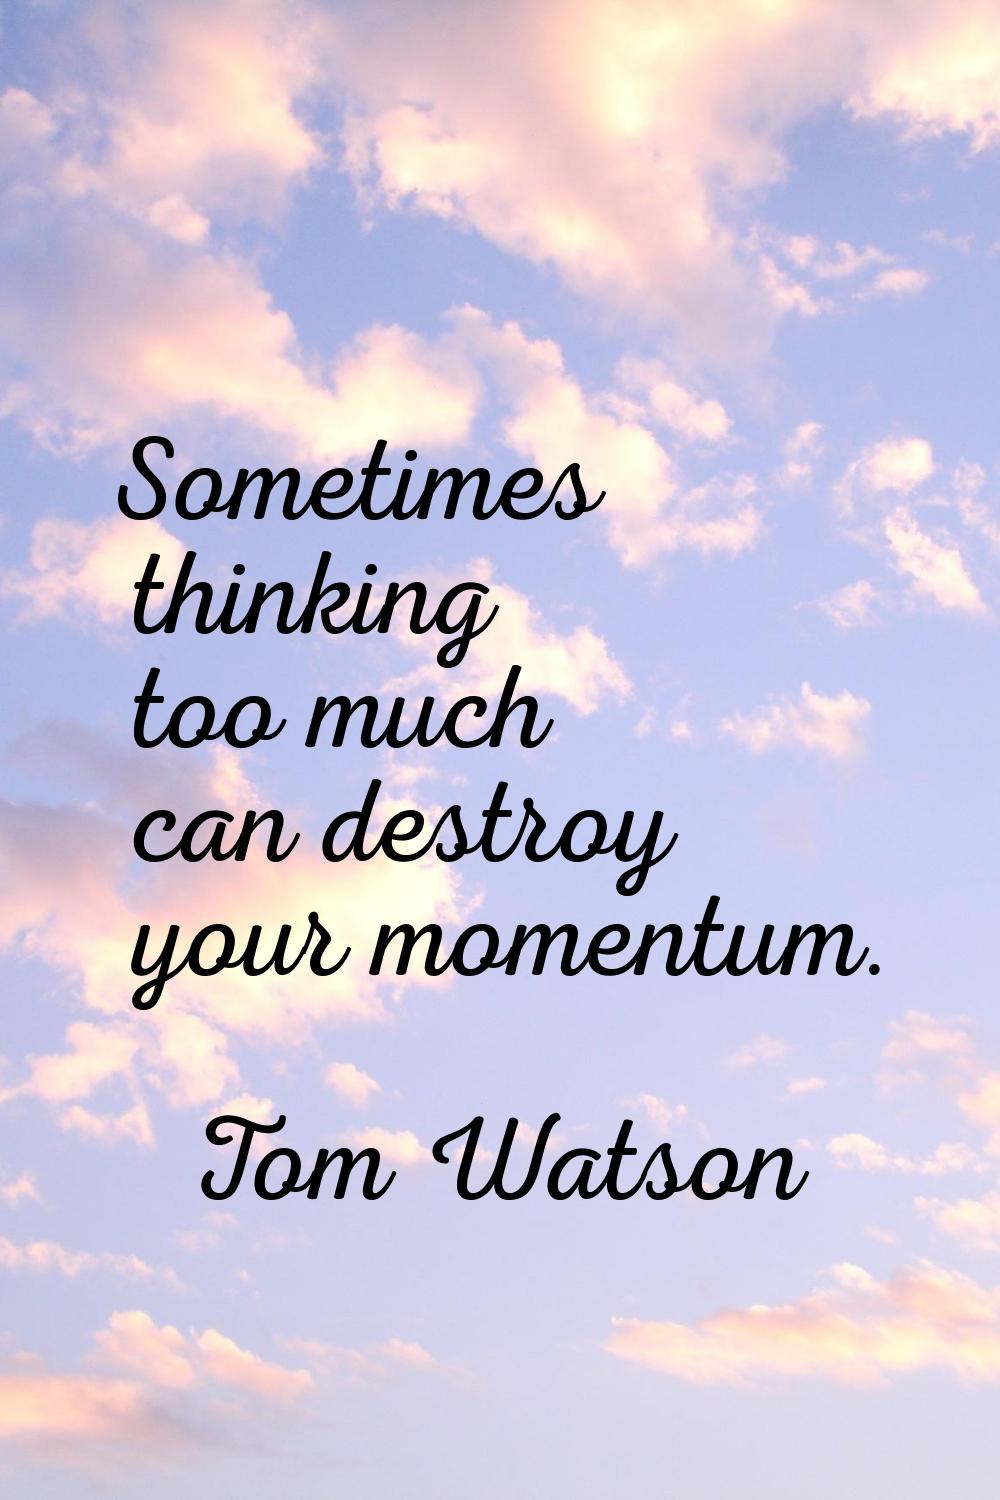 Sometimes thinking too much can destroy your momentum.